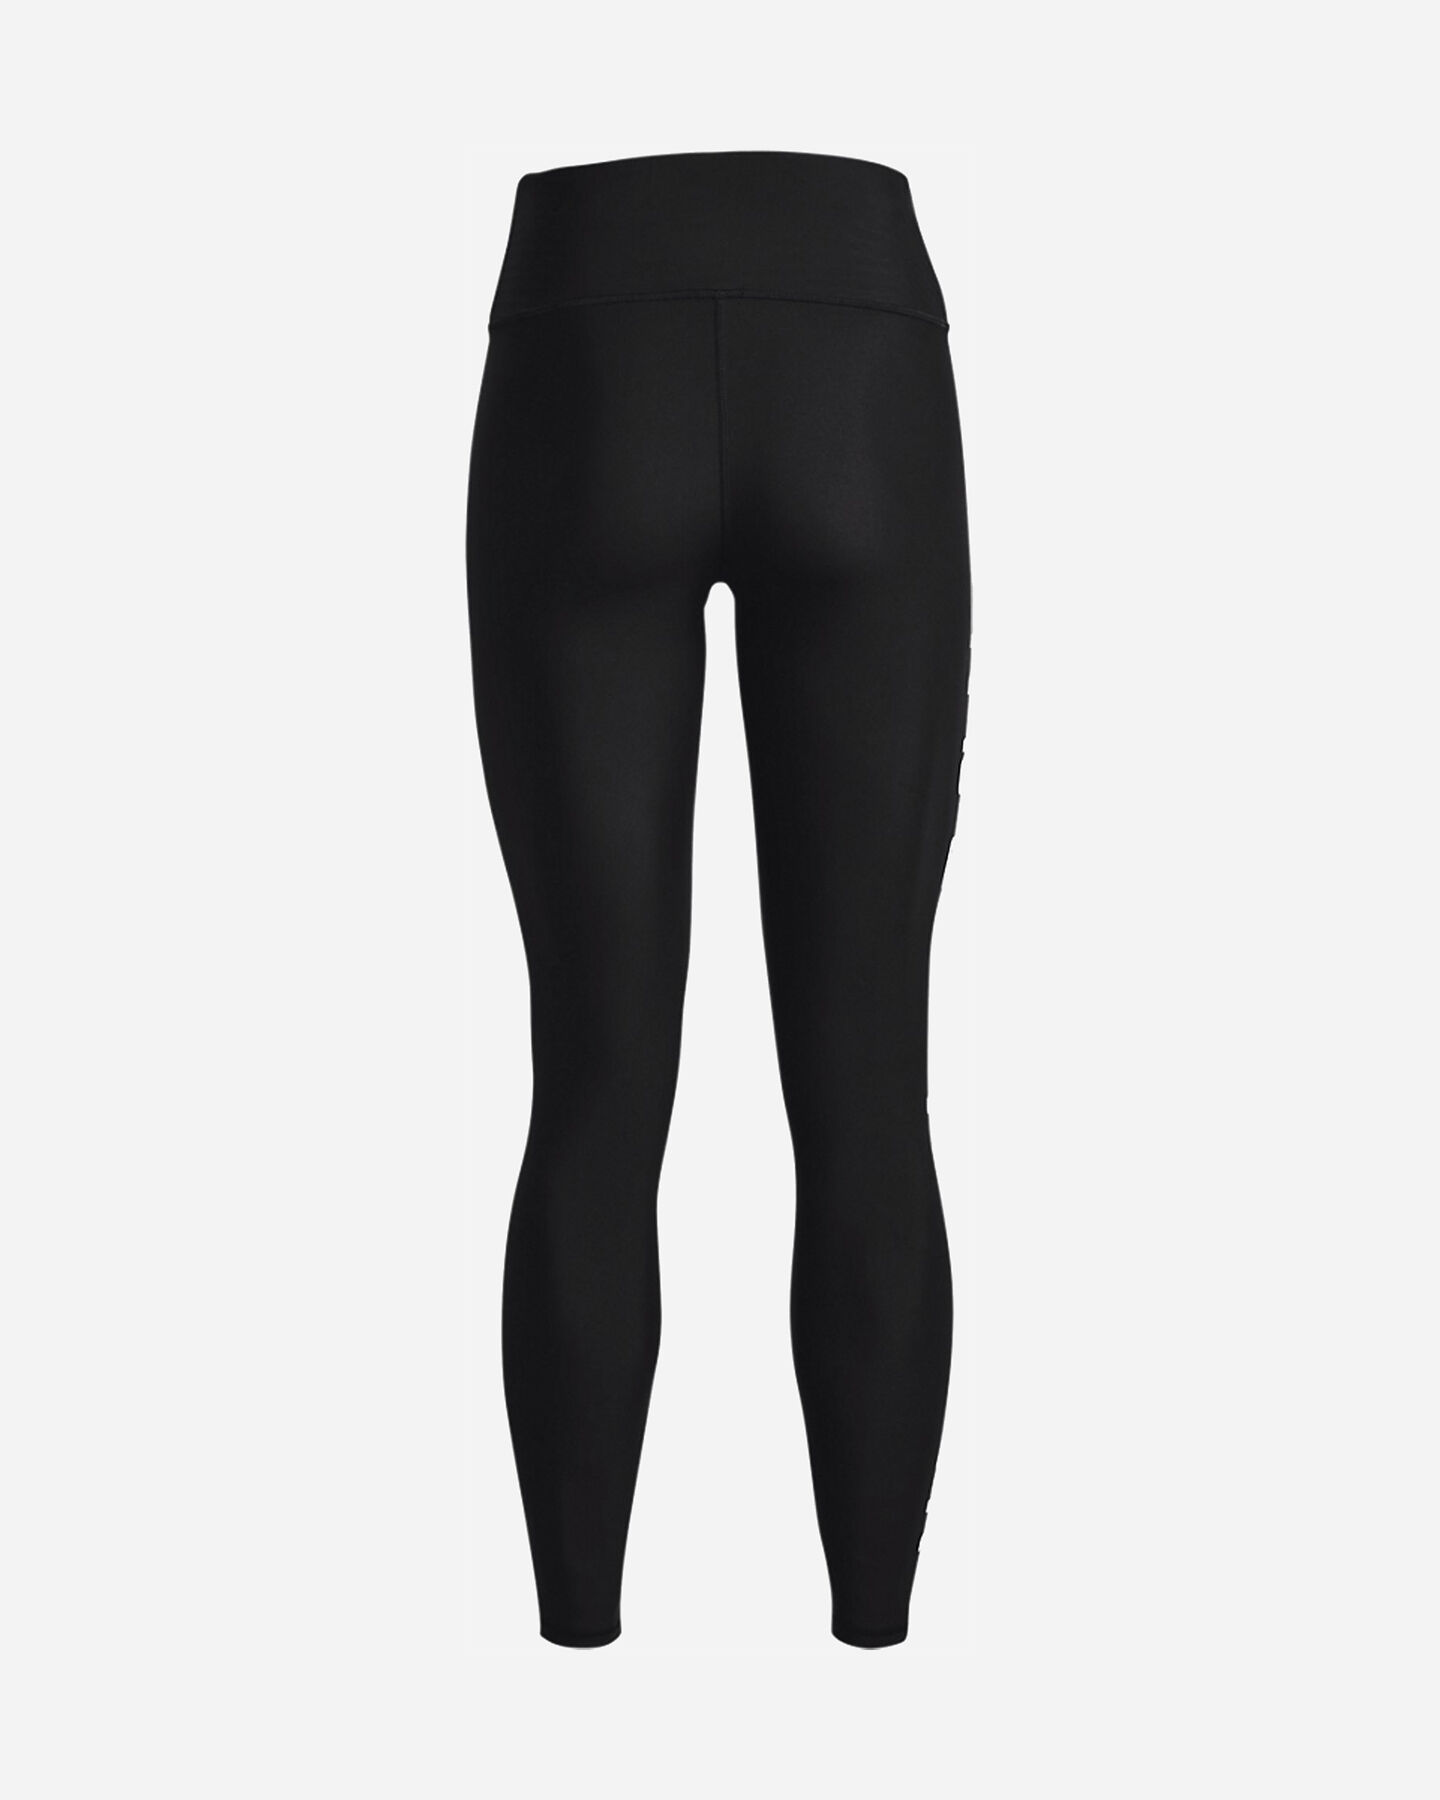  Leggings UNDER ARMOUR LATERAL LOGO W S5287029|0001|XS scatto 1